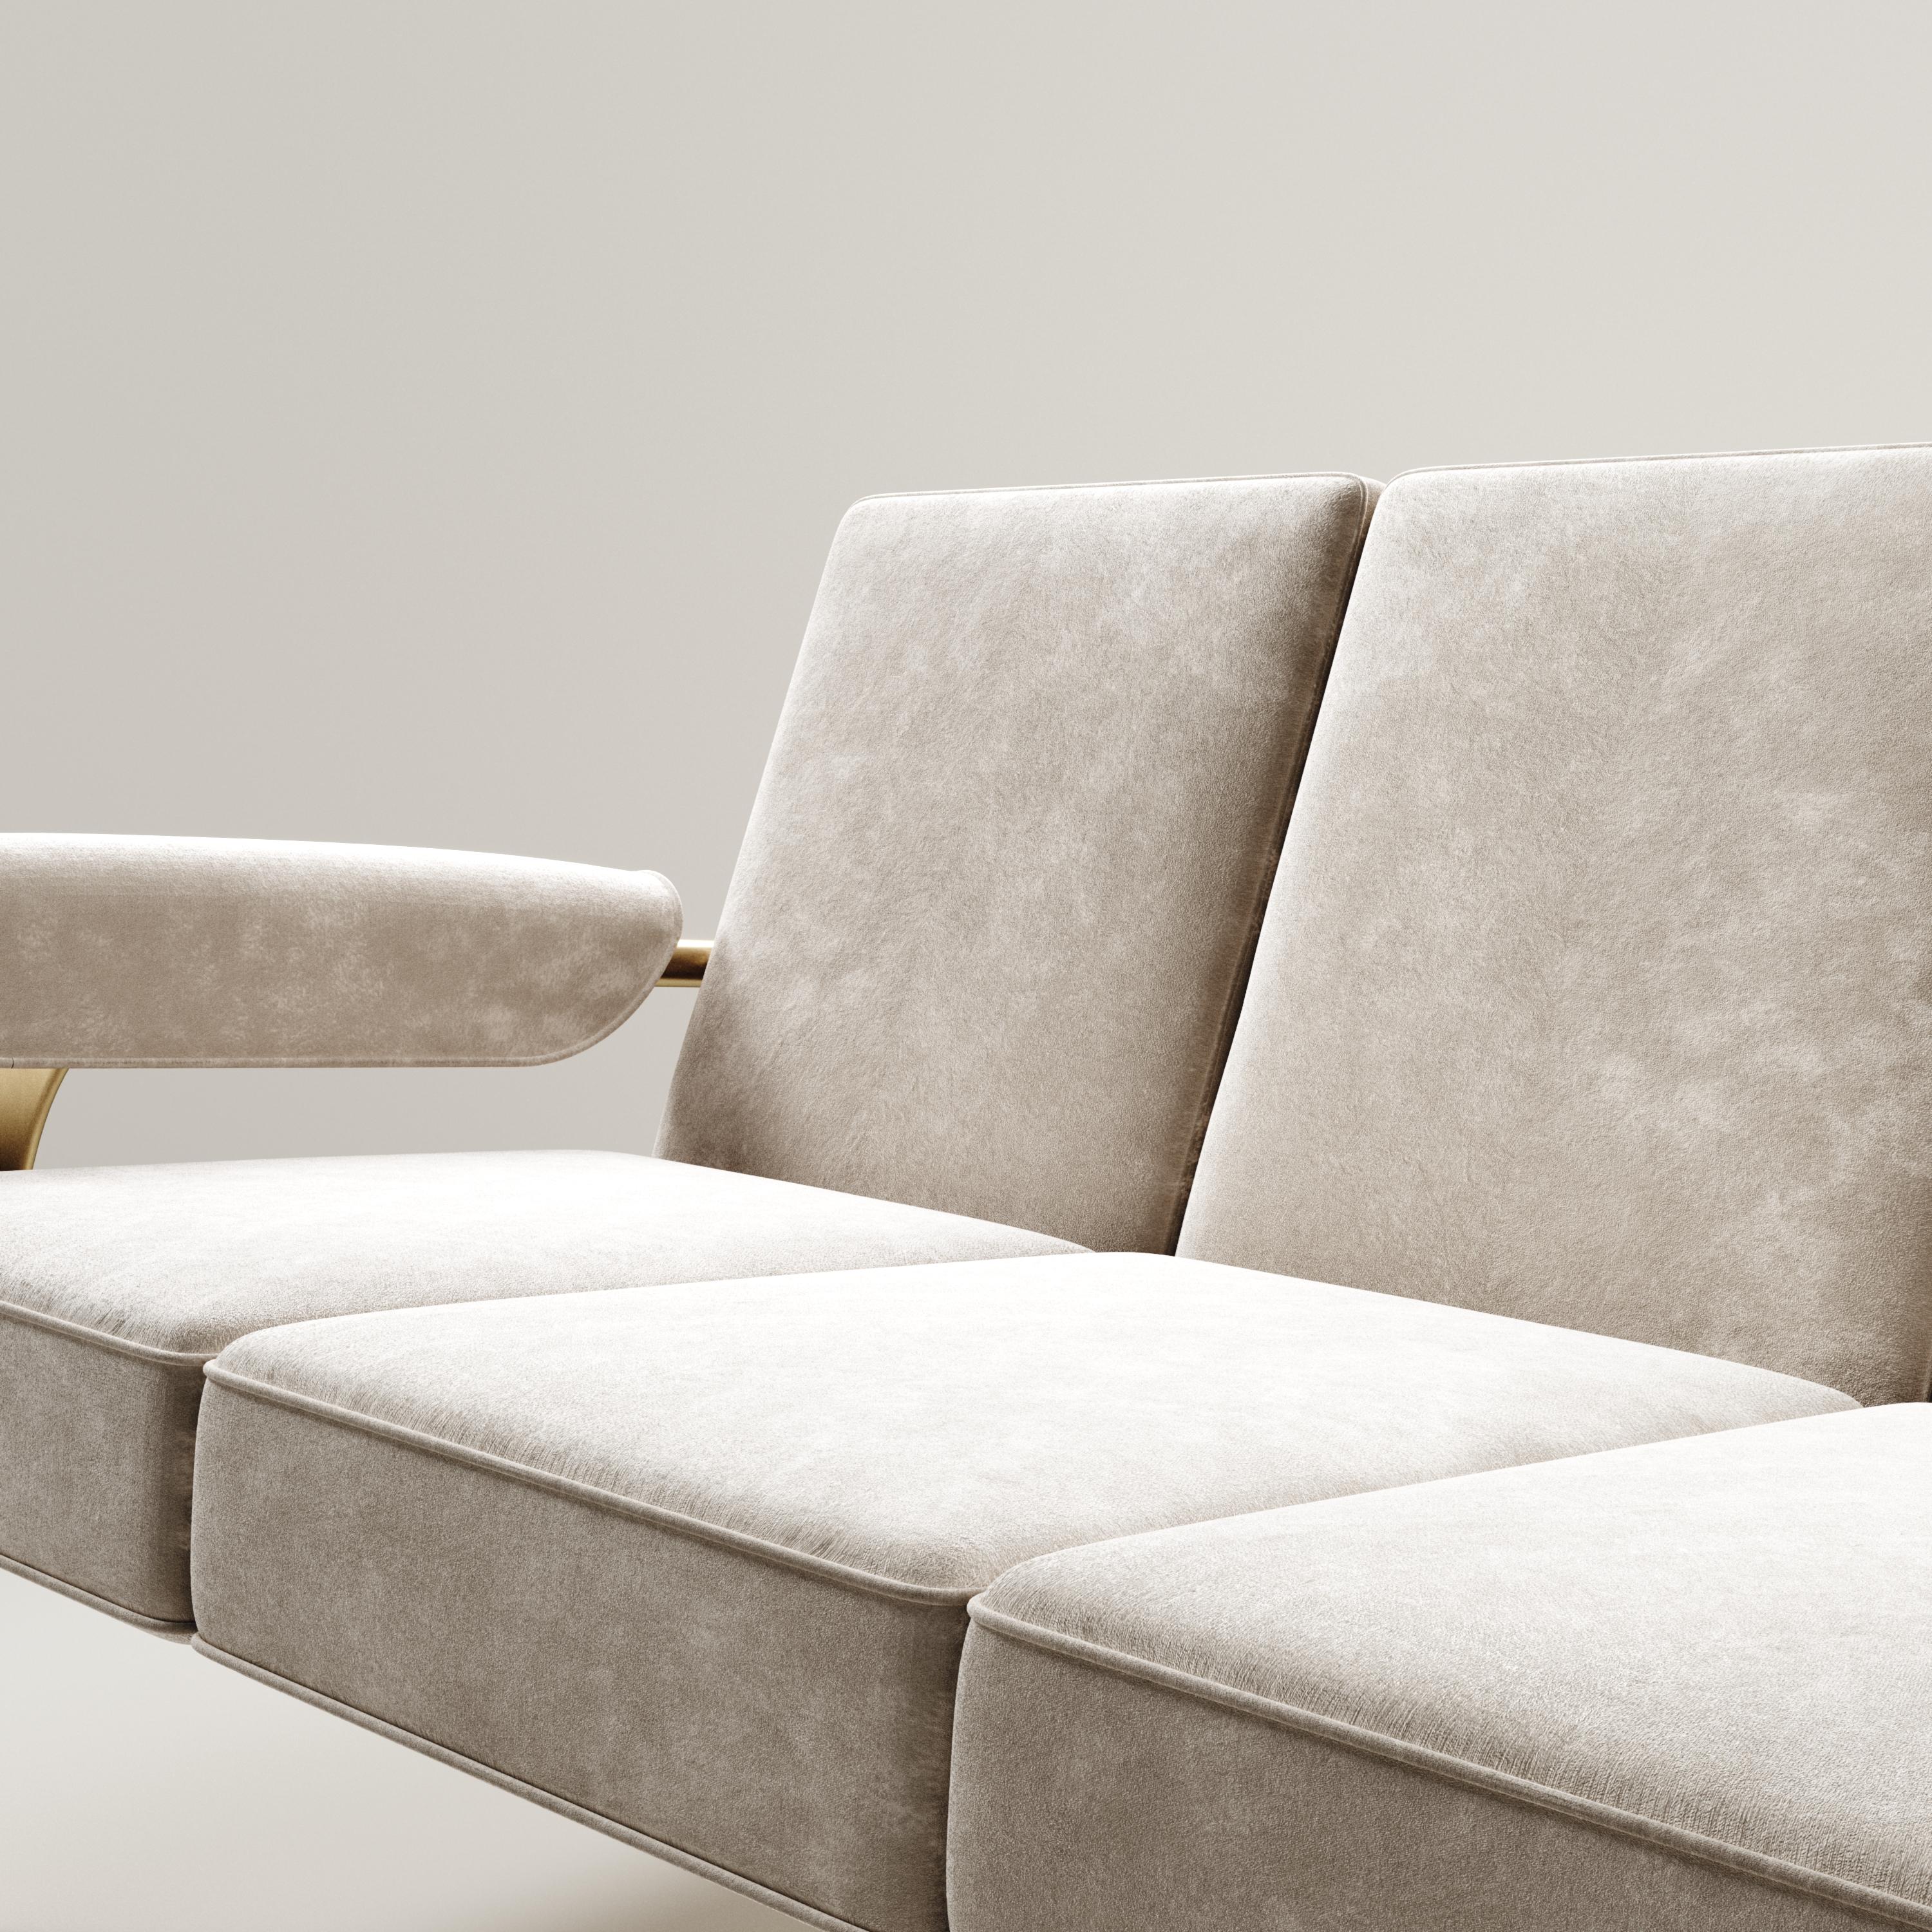 The Ramo sofa by R & Y Augousti is an elegant and versatile piece. The upholstered pieces provide comfort while retaining a unique aesthetic with the bronze-patina brass frame and details. This listing is priced for cream velvet, see other listings